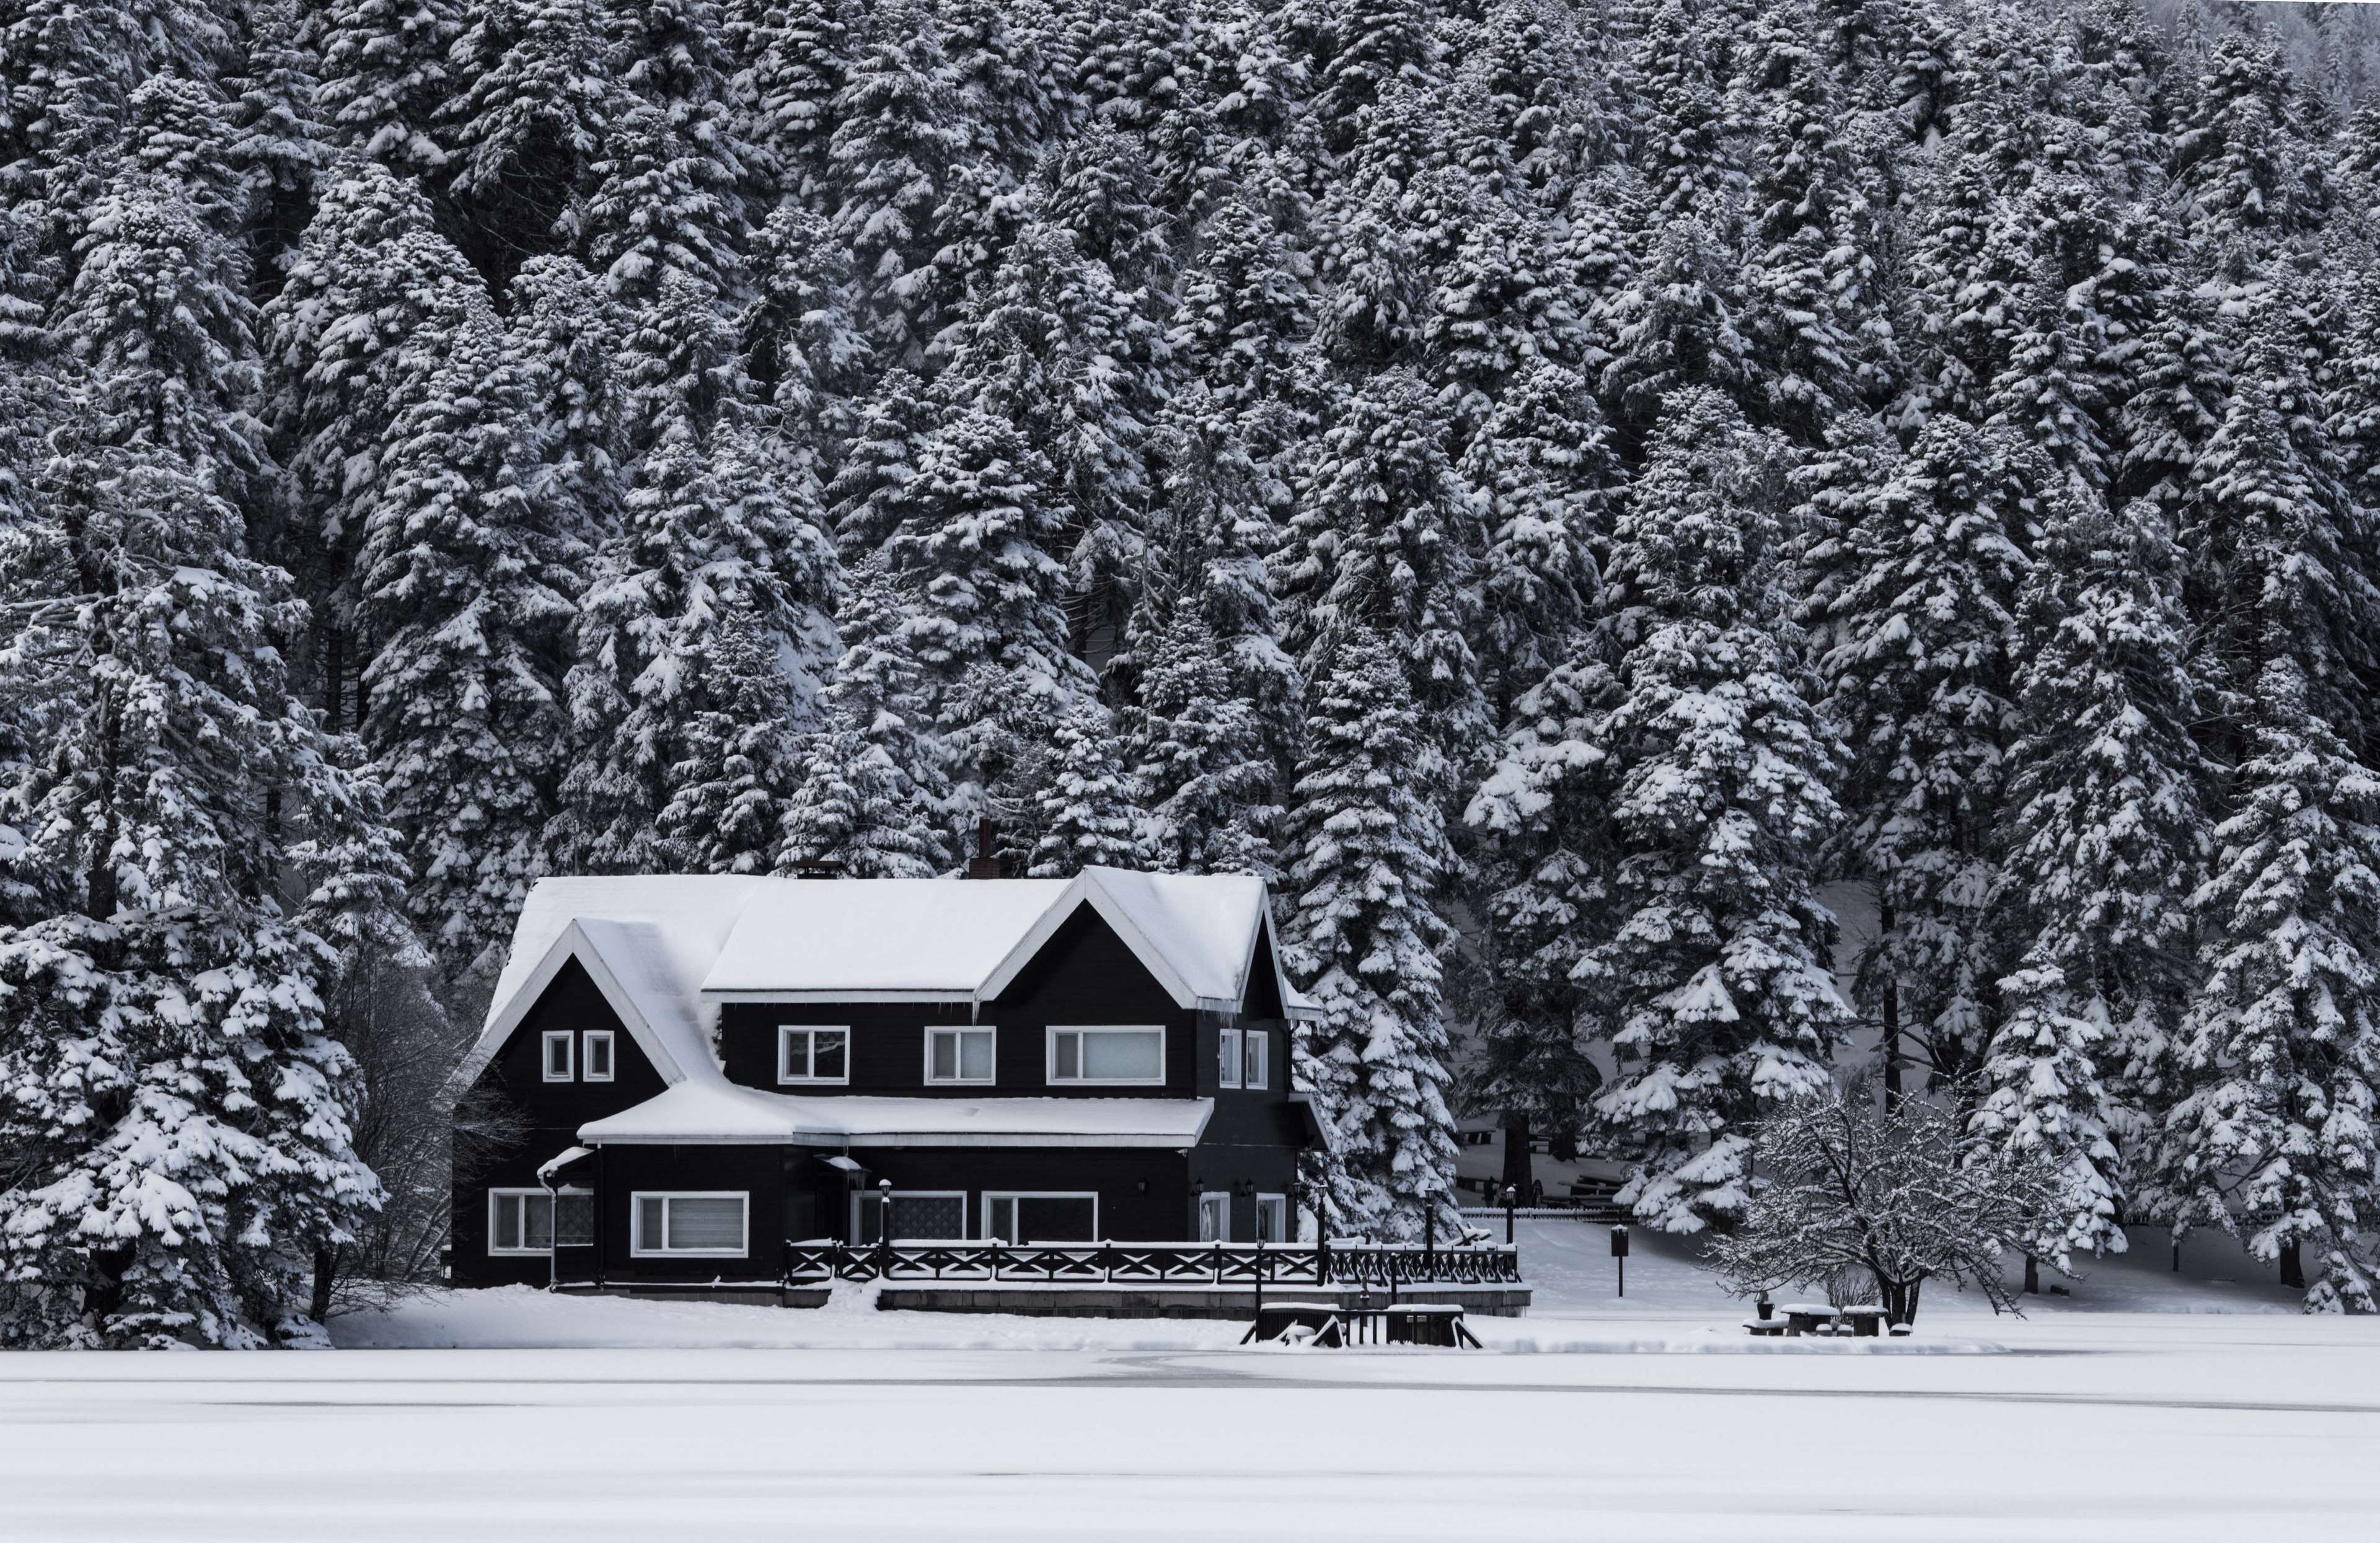 alone, calmness, cold, cool, forest, frost, frozen, home